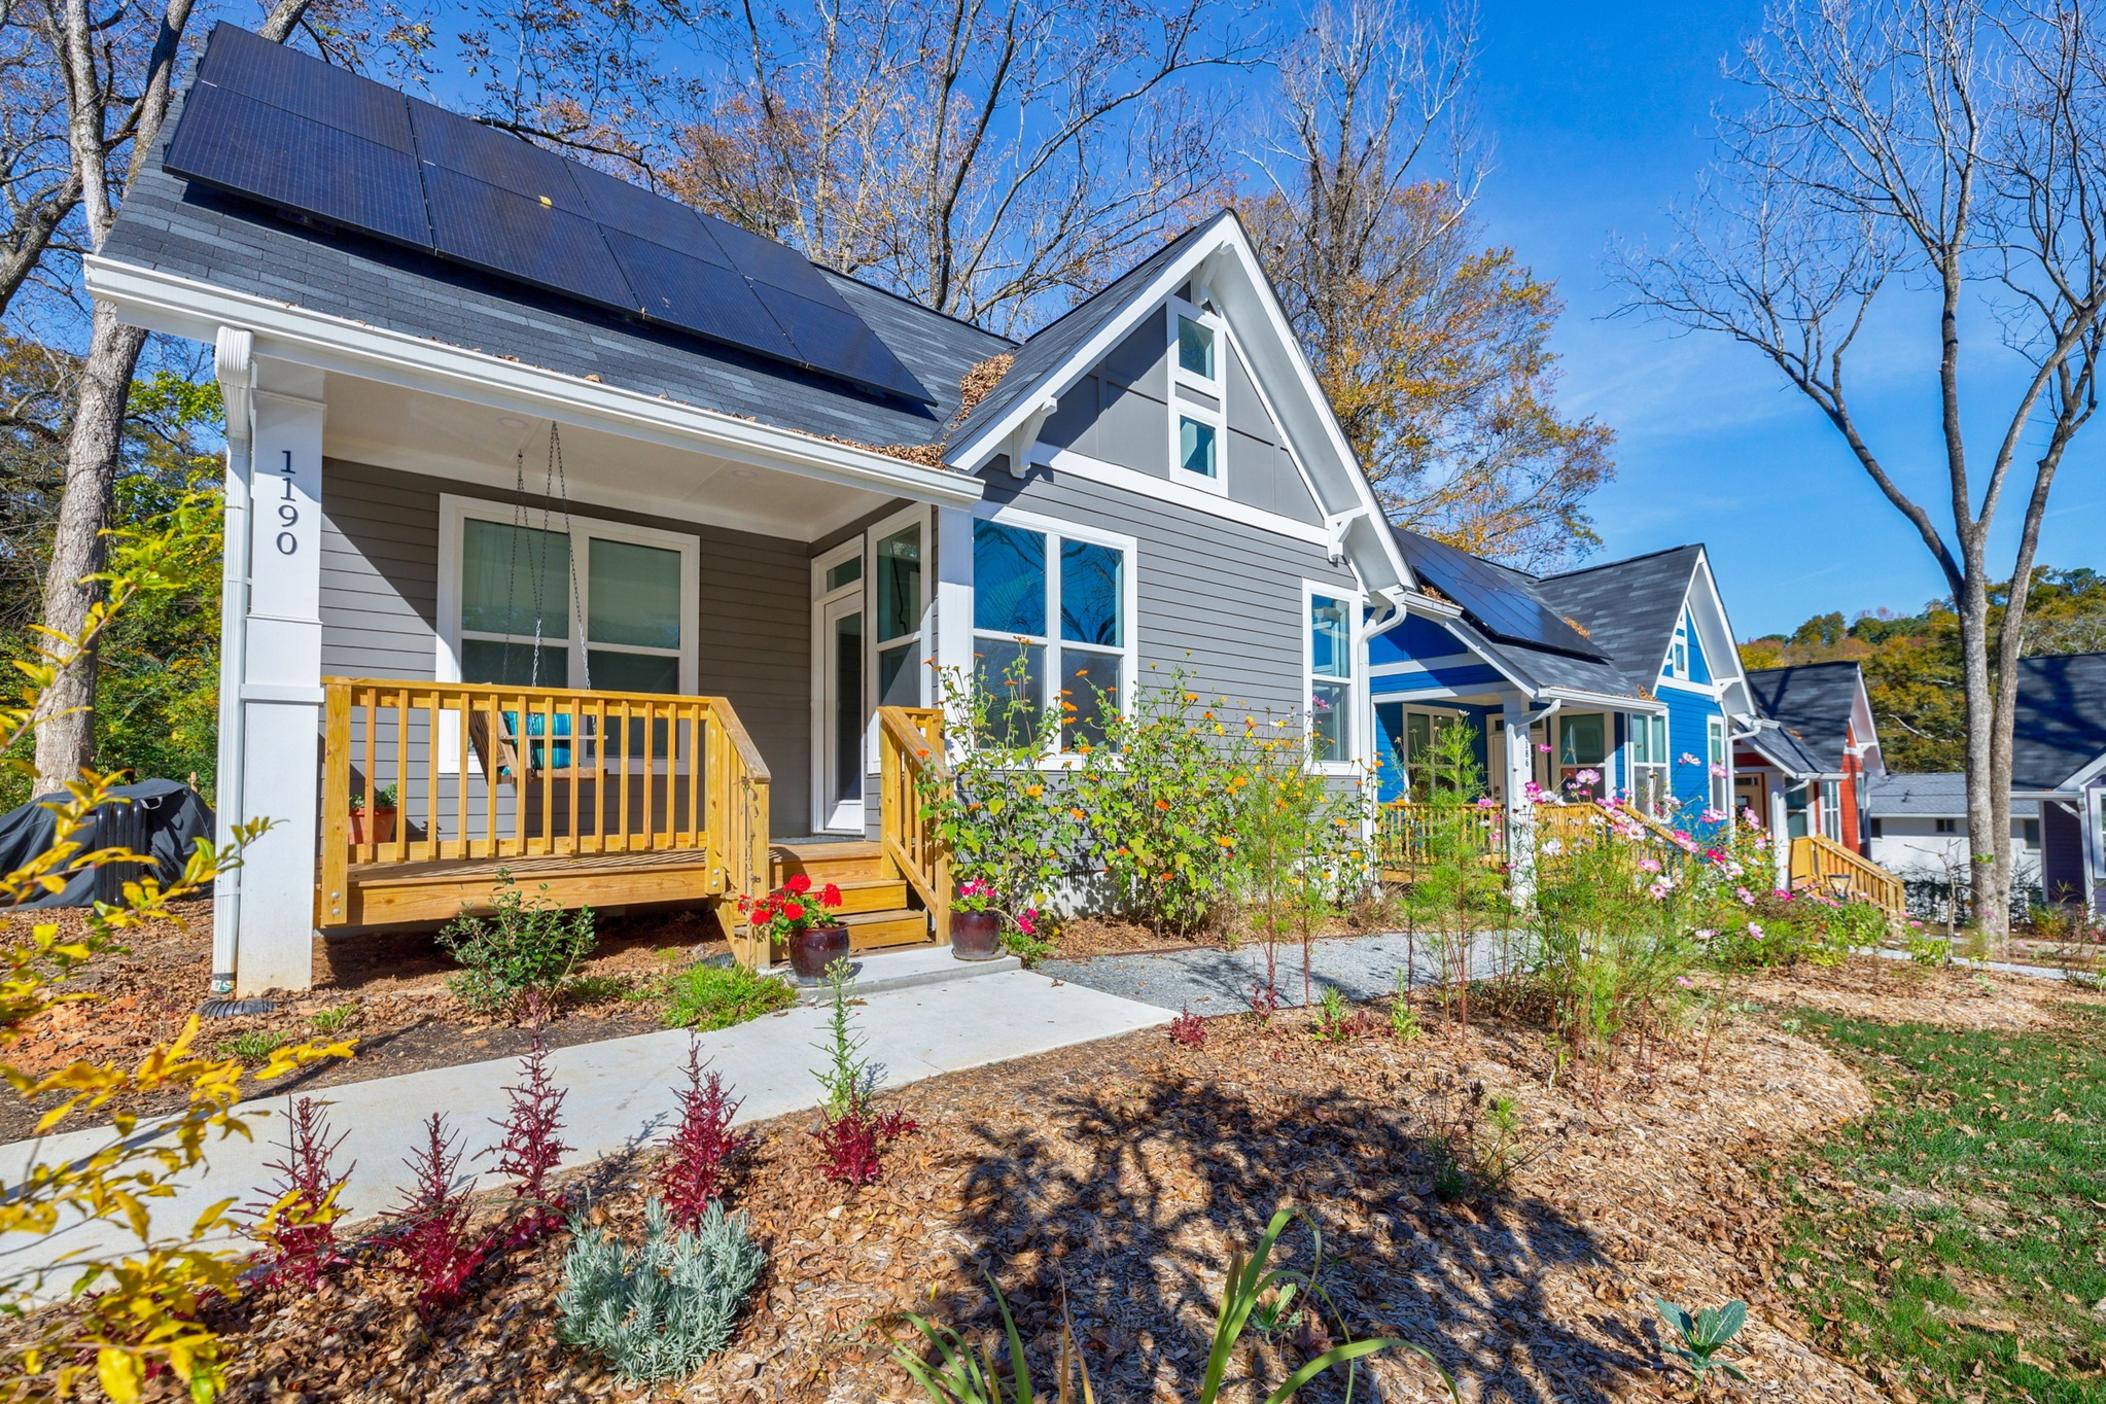 Housing nonprofit MicroLife Institute built a community of affordable tiny homes in Clarkston in 2021. Now they're working with Gwinnett Housing Corporation to develop a tiny home community in Gwinnett County.